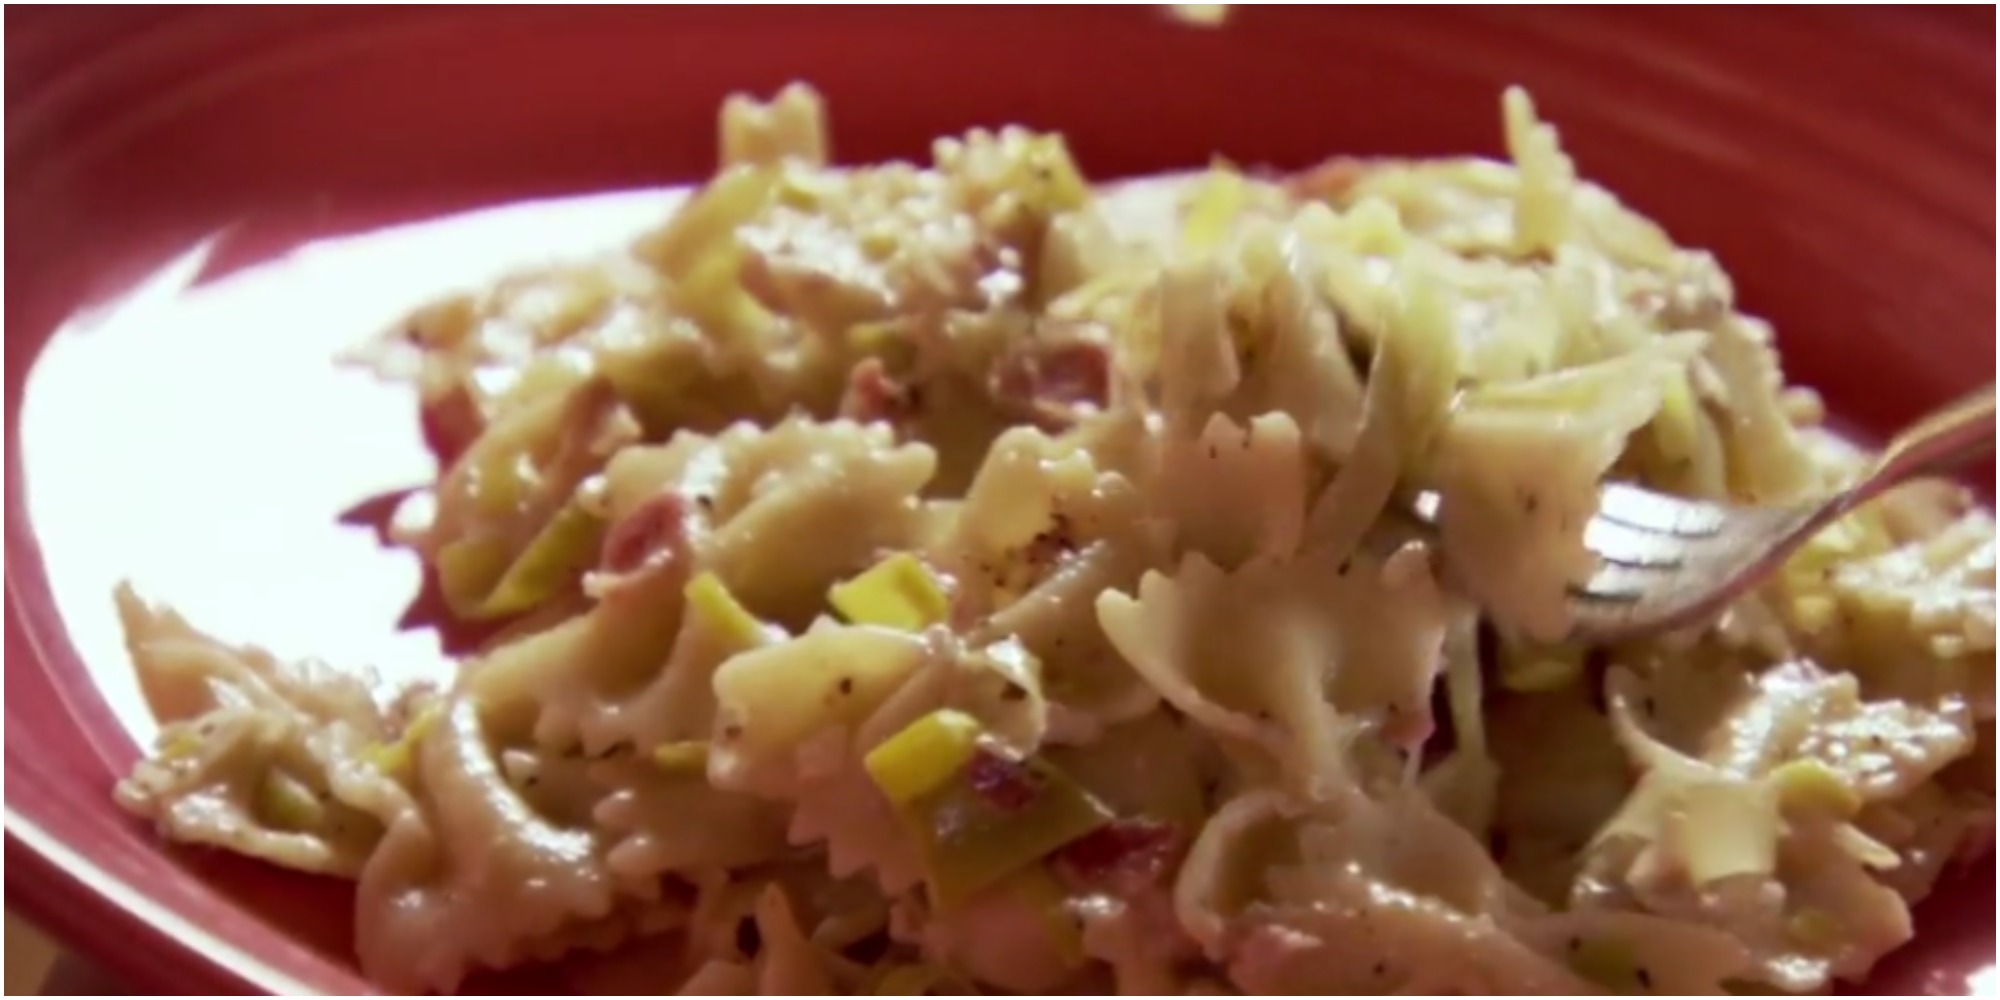 Ree Drummond's Pasta with Pancetta and Leeks.